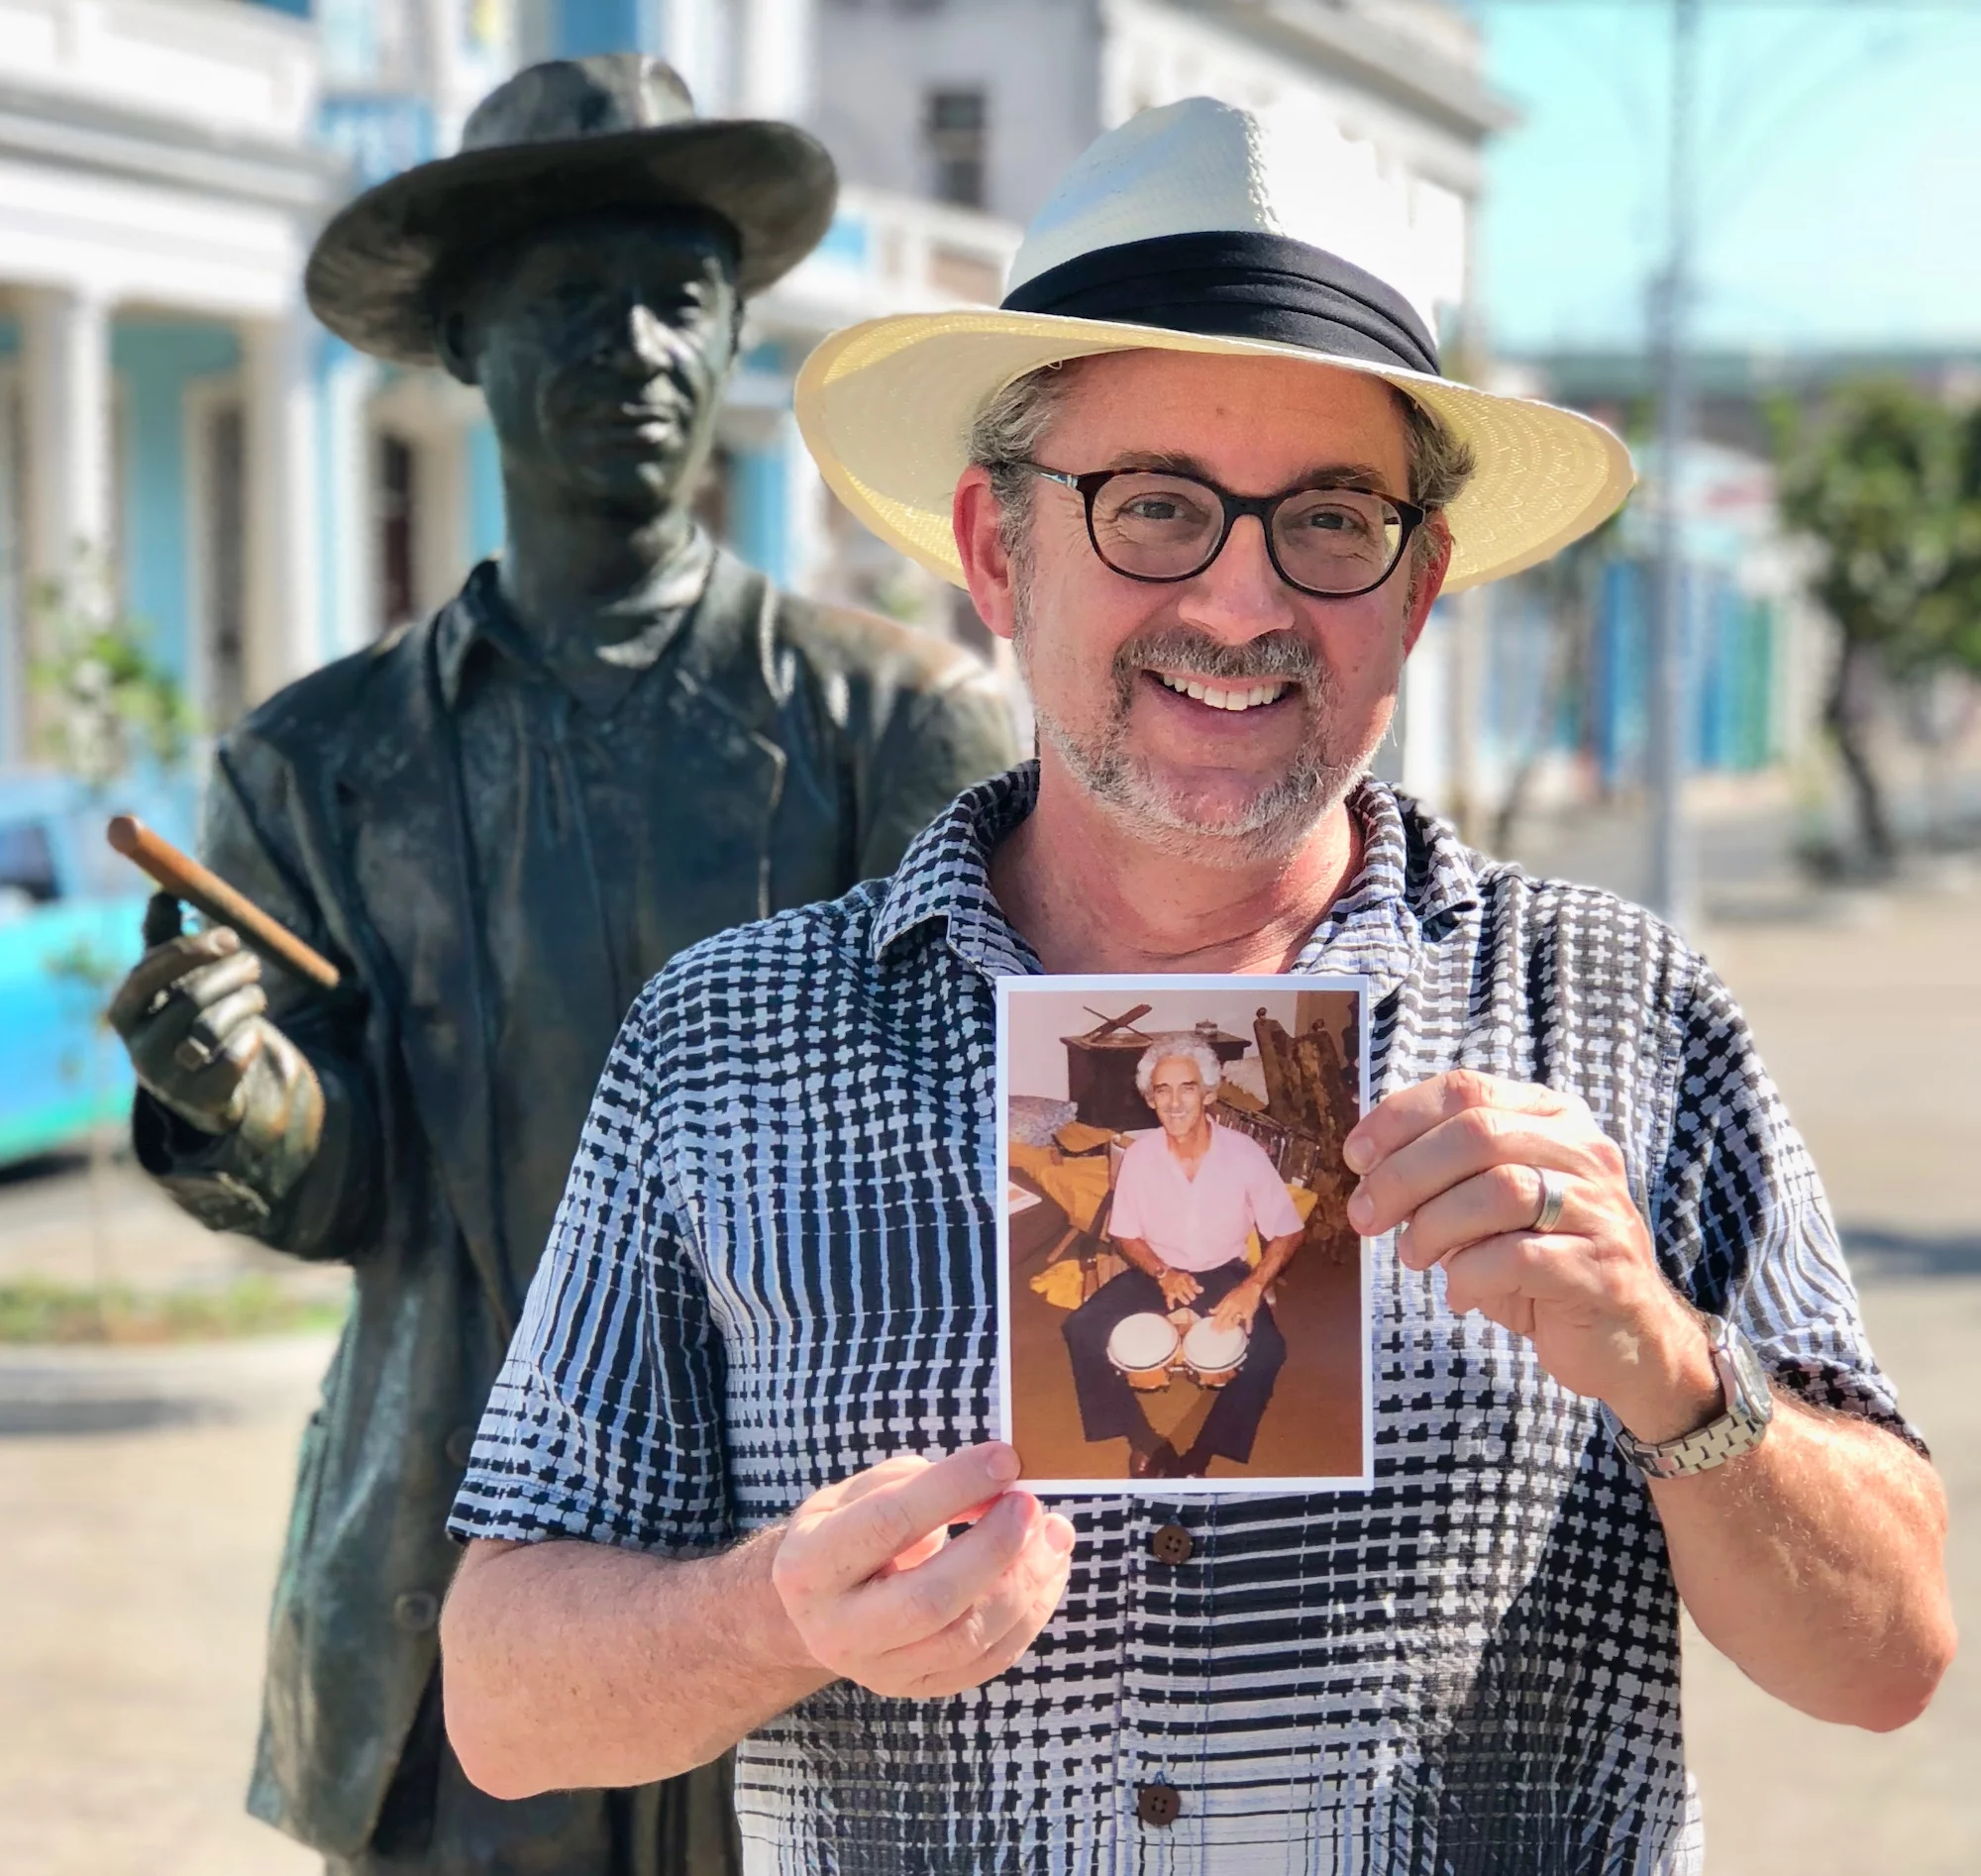 Cuba - Miguel holding a photo of his father at the statue of singer Beny Moré - Cienfuegos